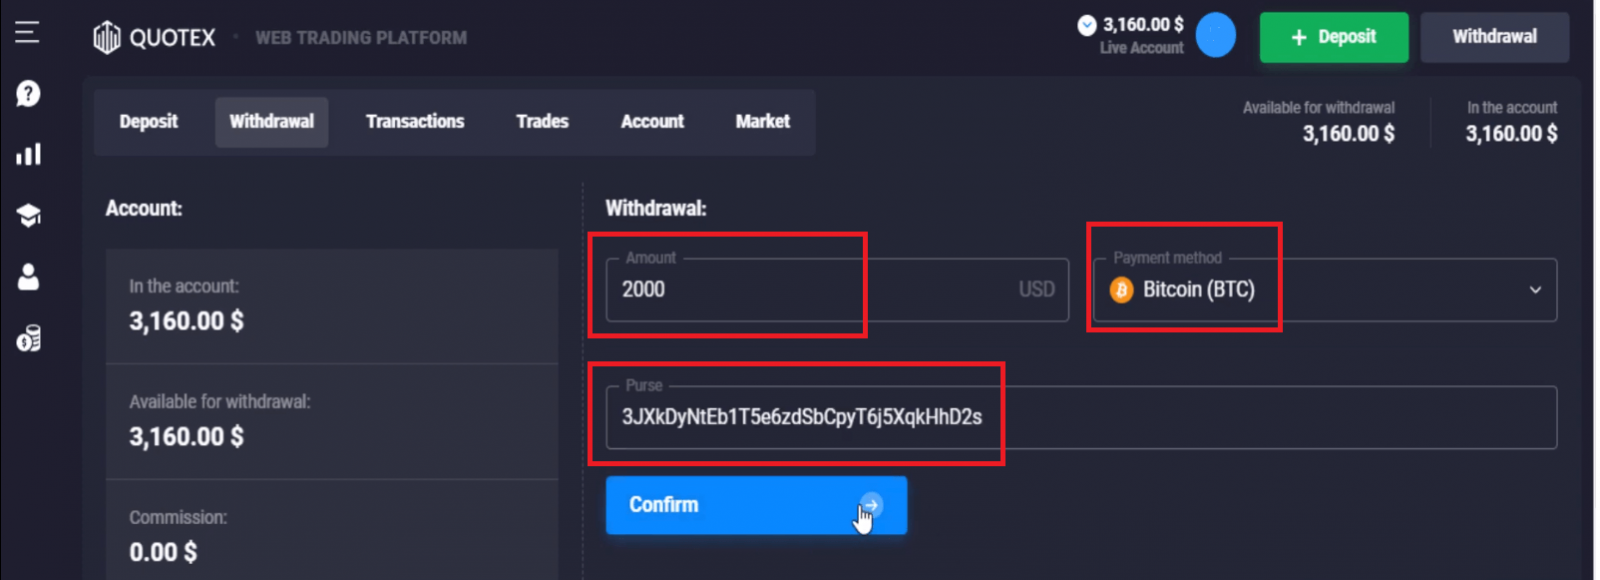 How to Withdraw Money from Quotex